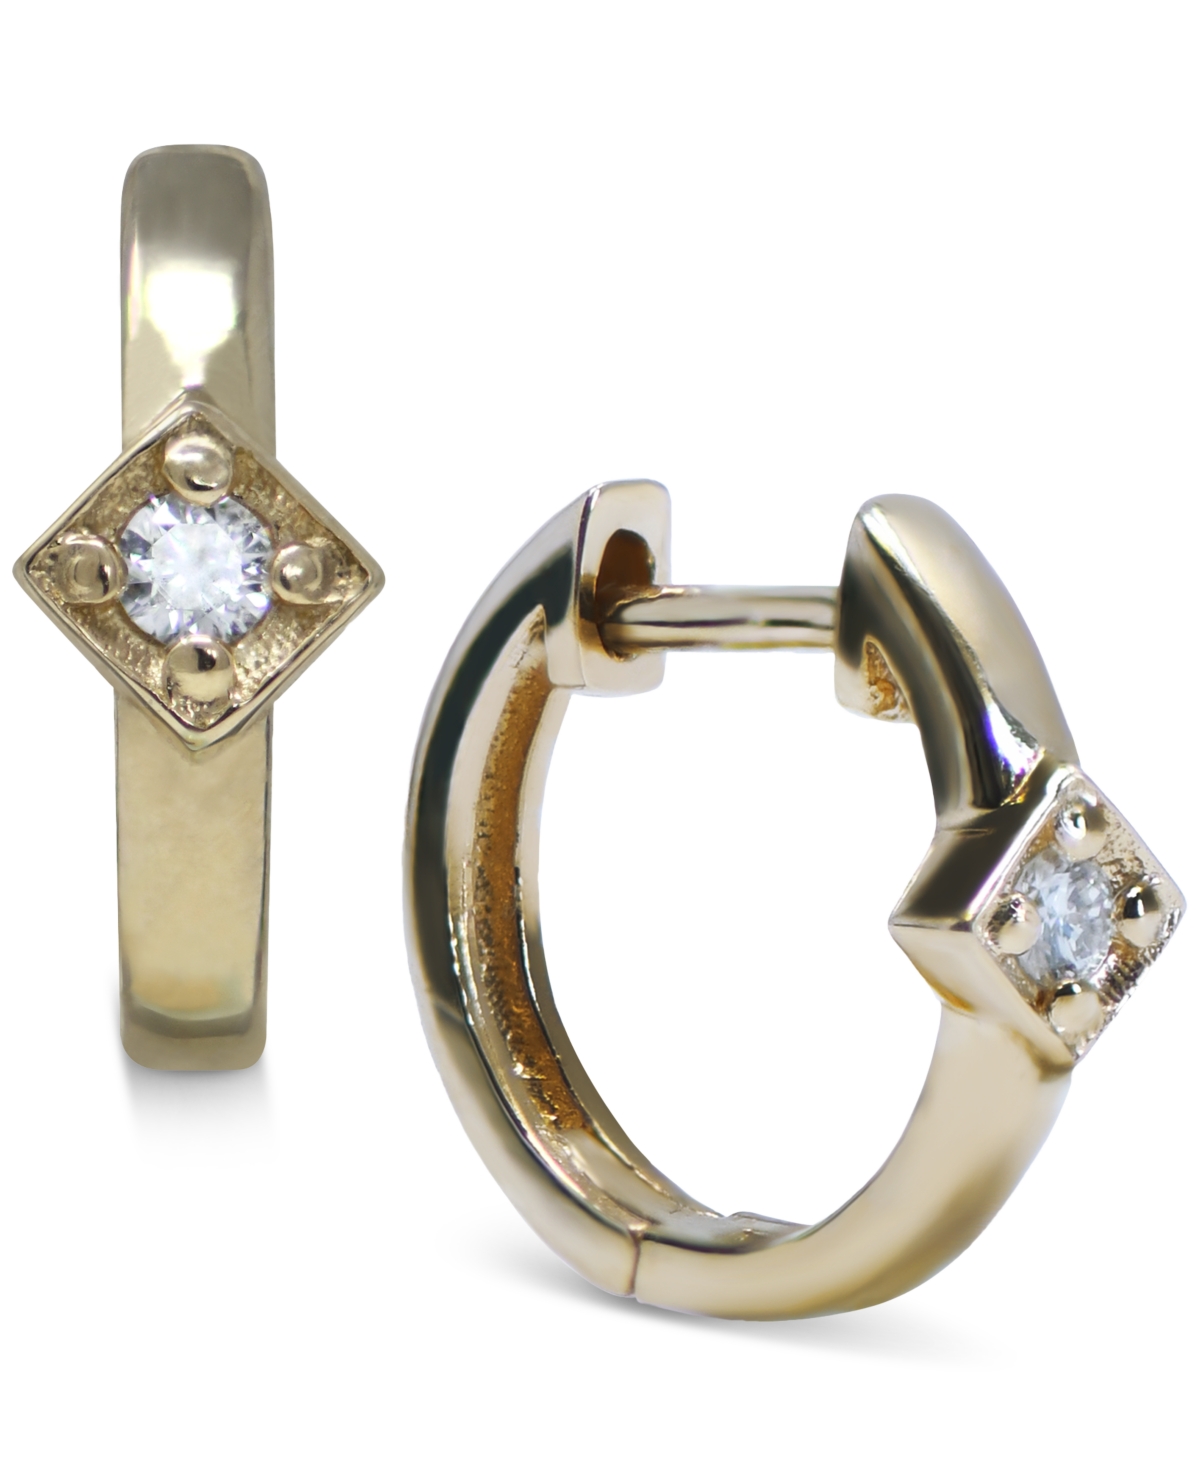 Diamond Accent Square Huggie Hoop Earrings in 14k Gold, 0.47" - Gold